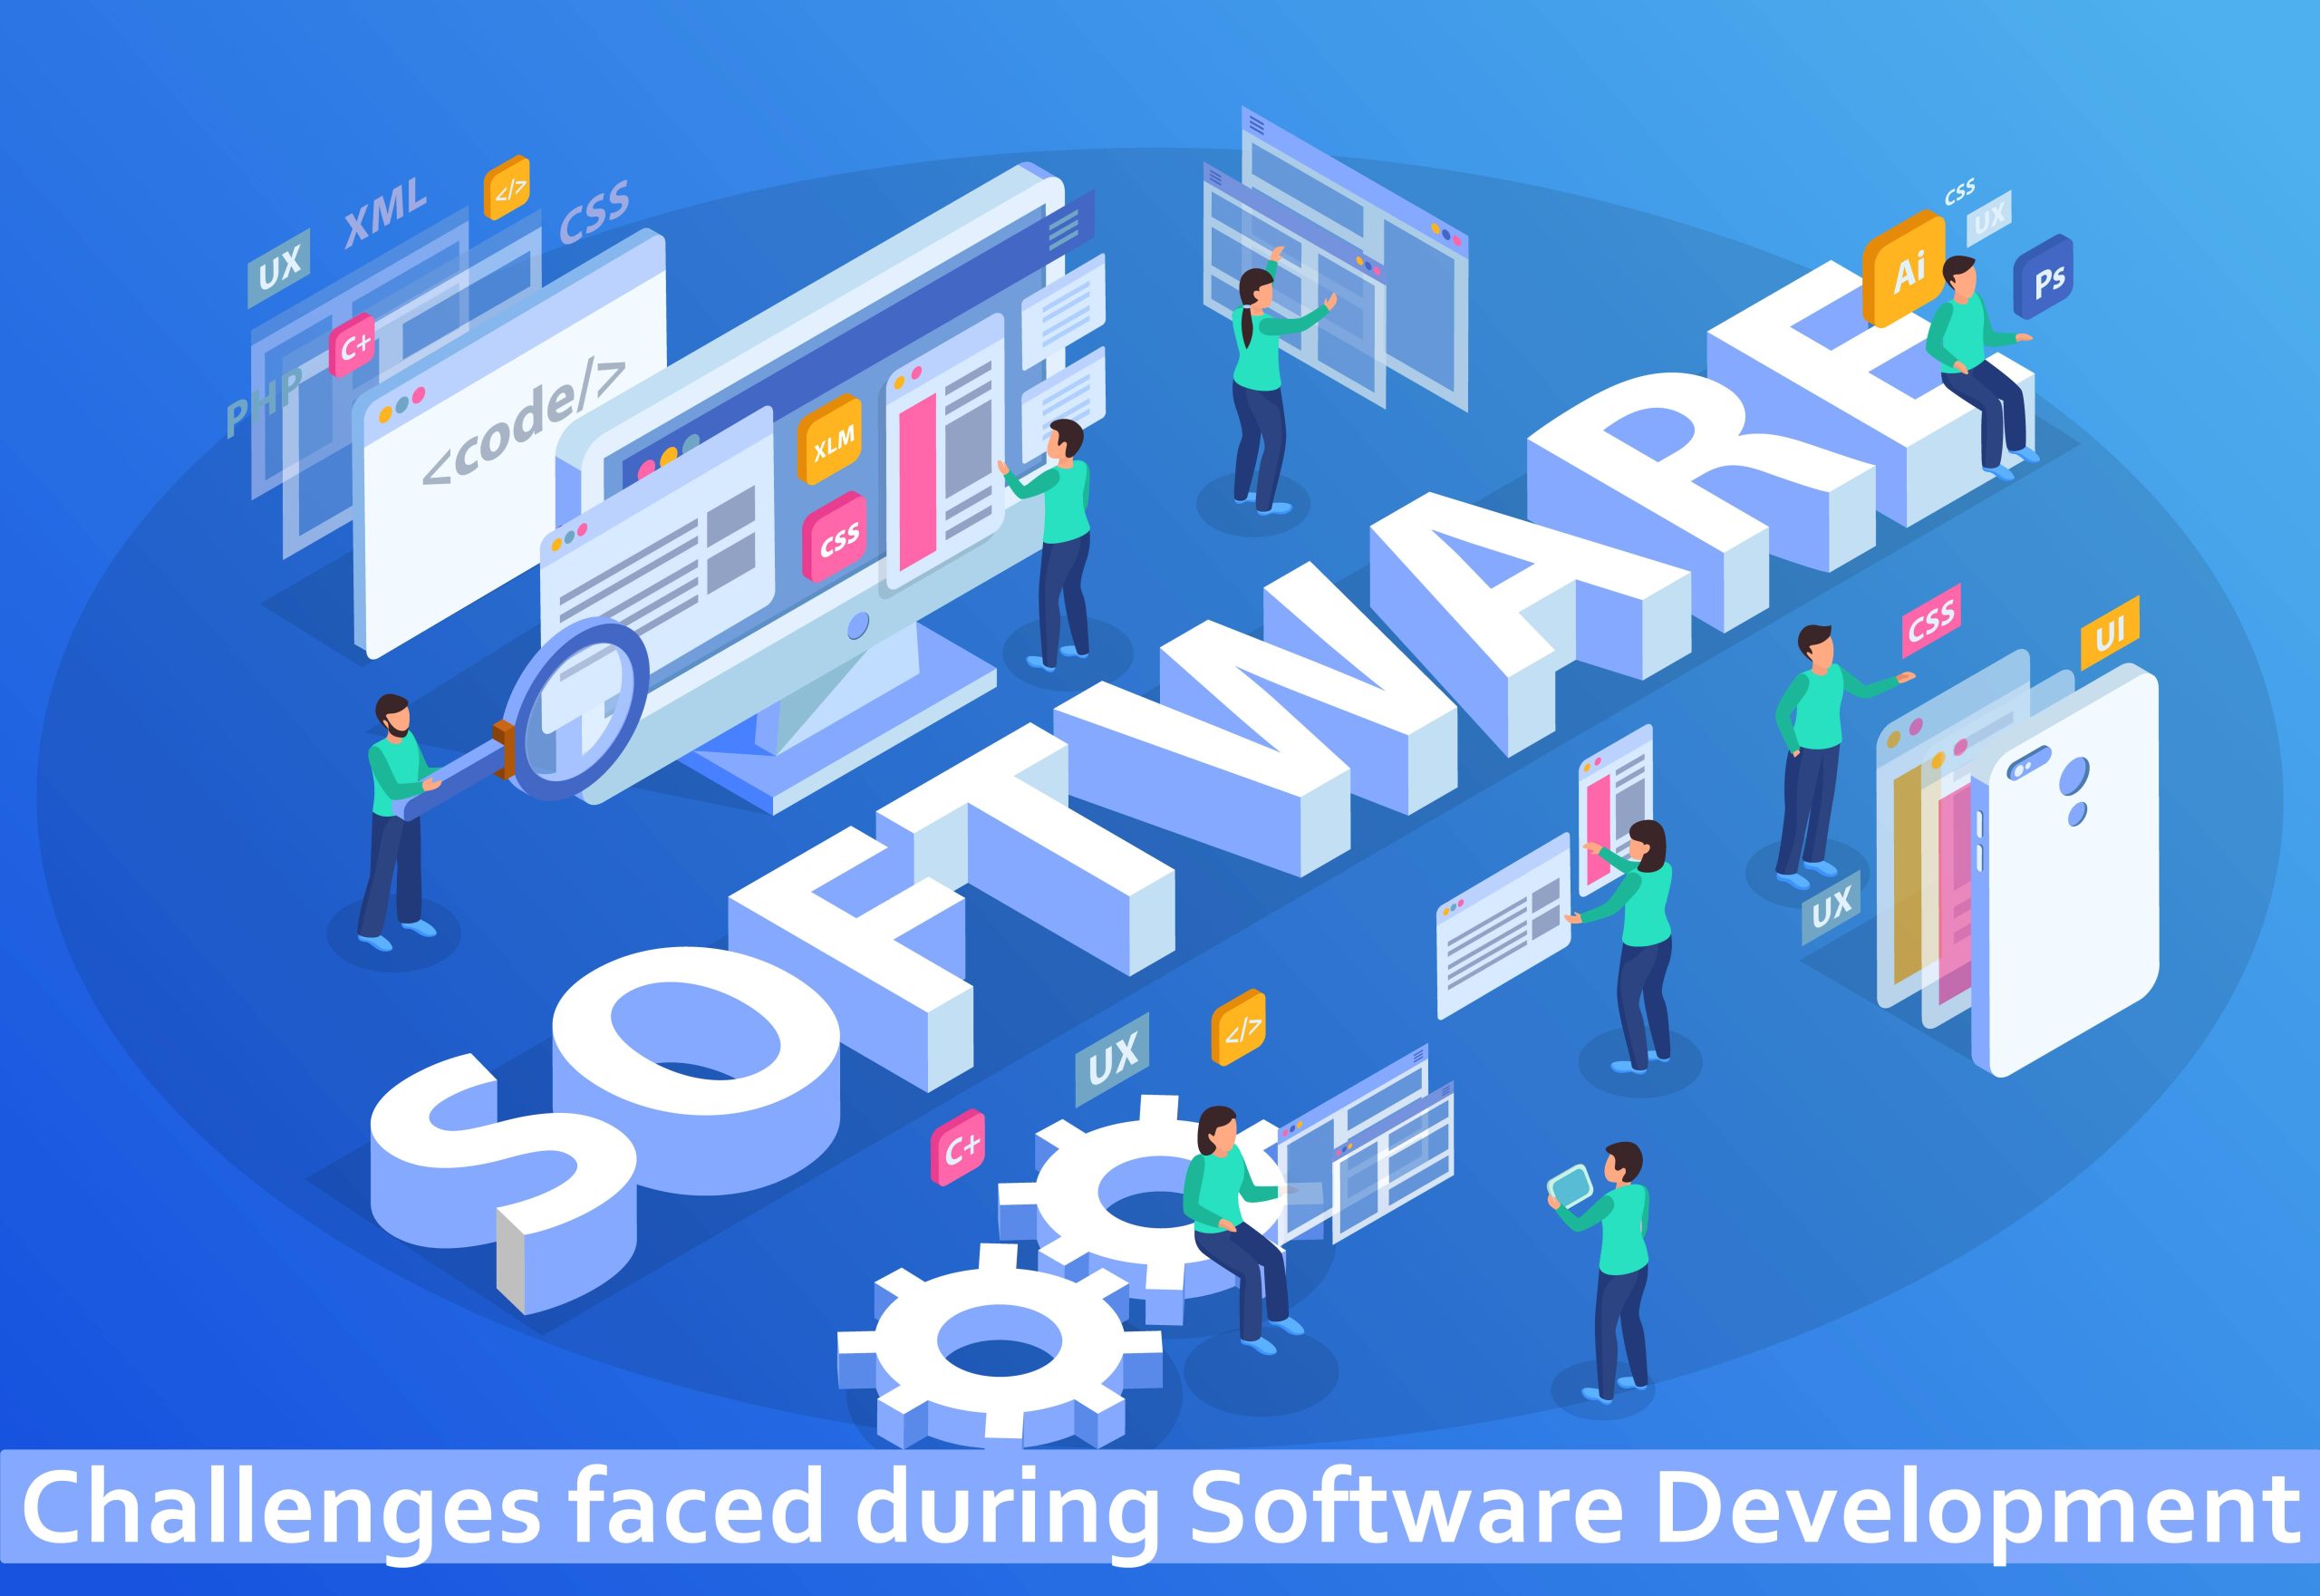 Challenges faced during Software Development